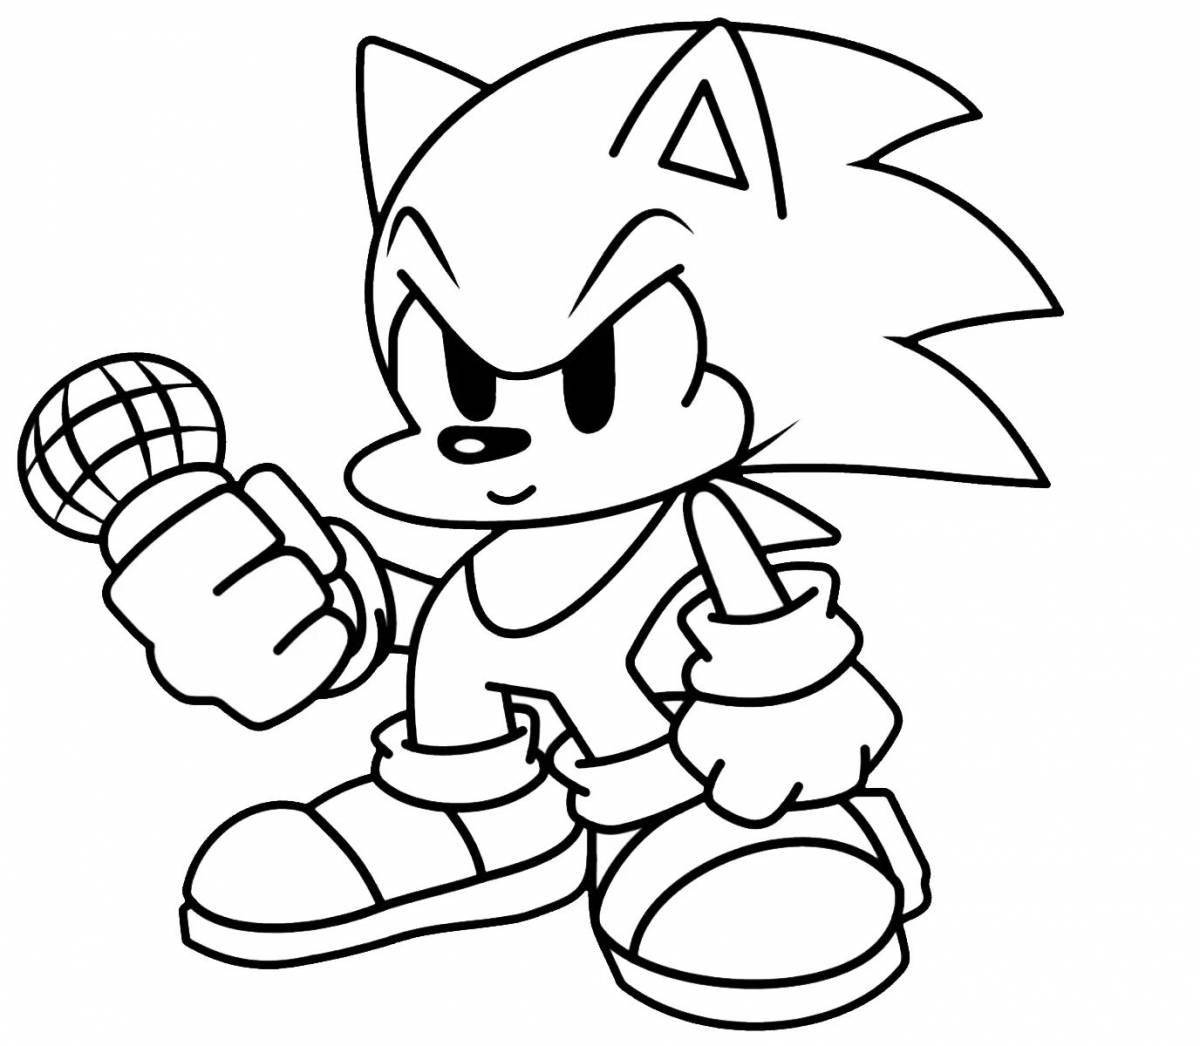 Minecraft sonic live coloring